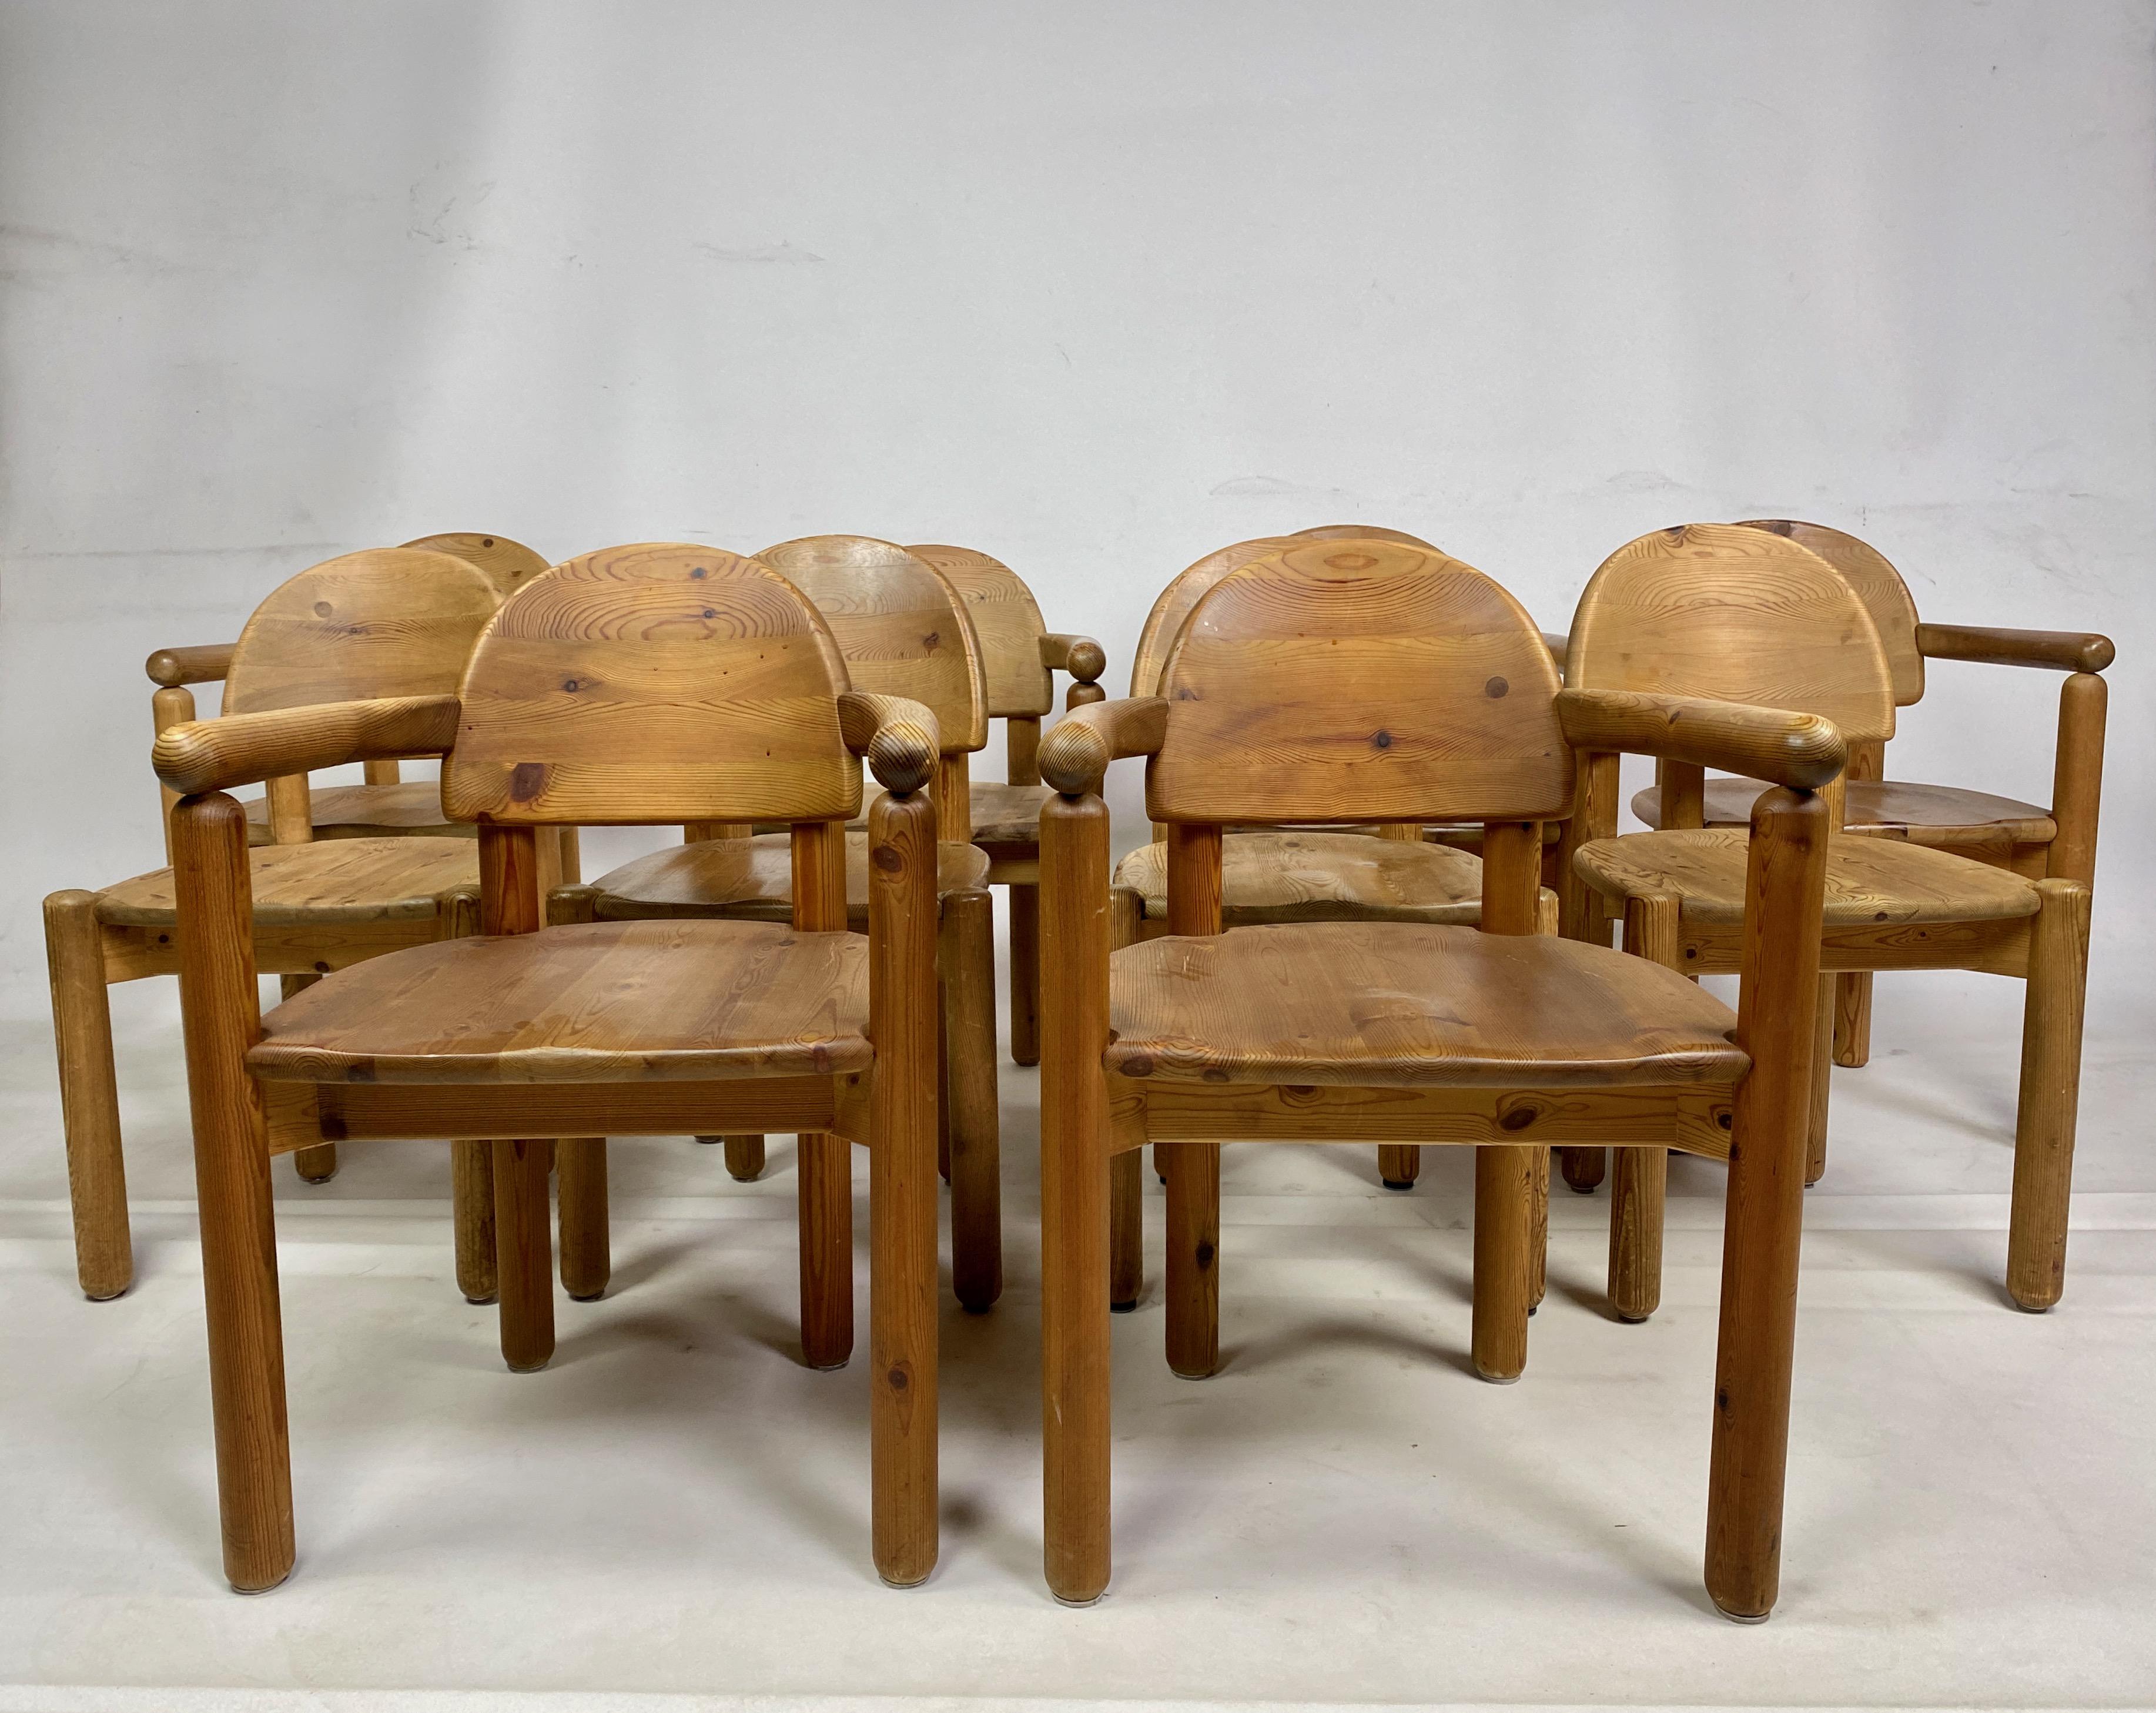 Set of ten dining chairs

Pine

Attributed to Rainer Daumiller

Six armchairs

Four without arms

Original condition

Some variance in colour

Chairs measure 82h x 48w x 45d cm

Seat height 46cm

Denmark 1970s.

